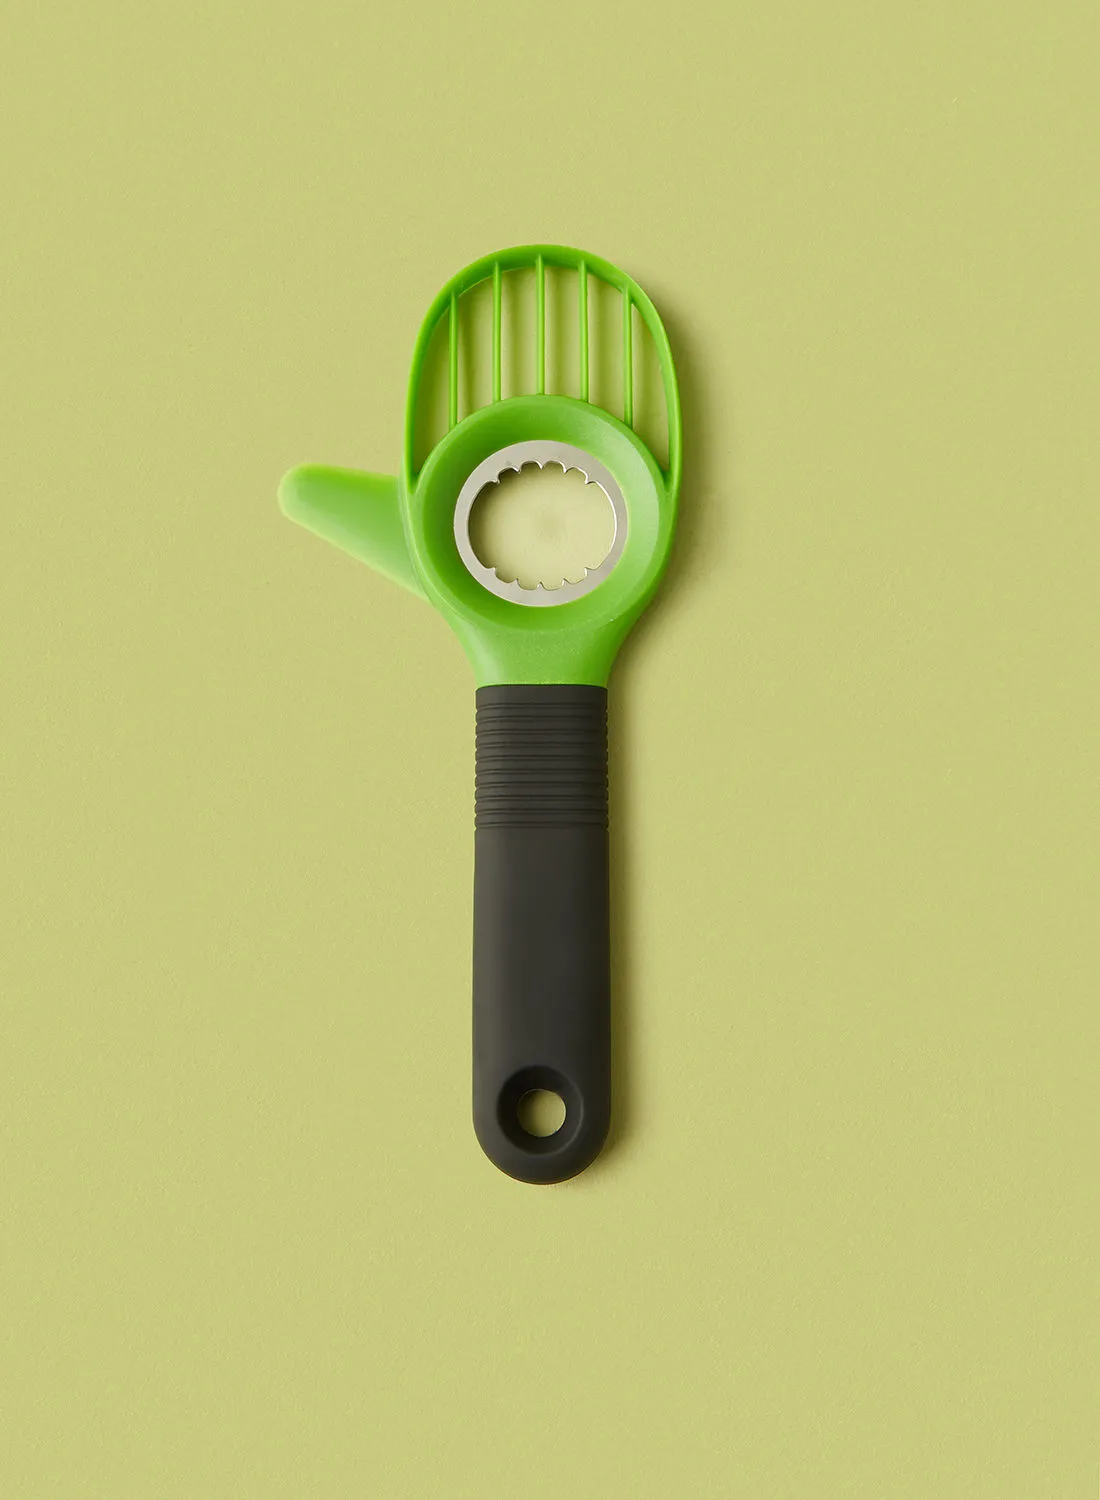 noon east Avocado Slicer - Manual - Kitchen Accessories - Kitchen Tool - Fruits - Green/Black